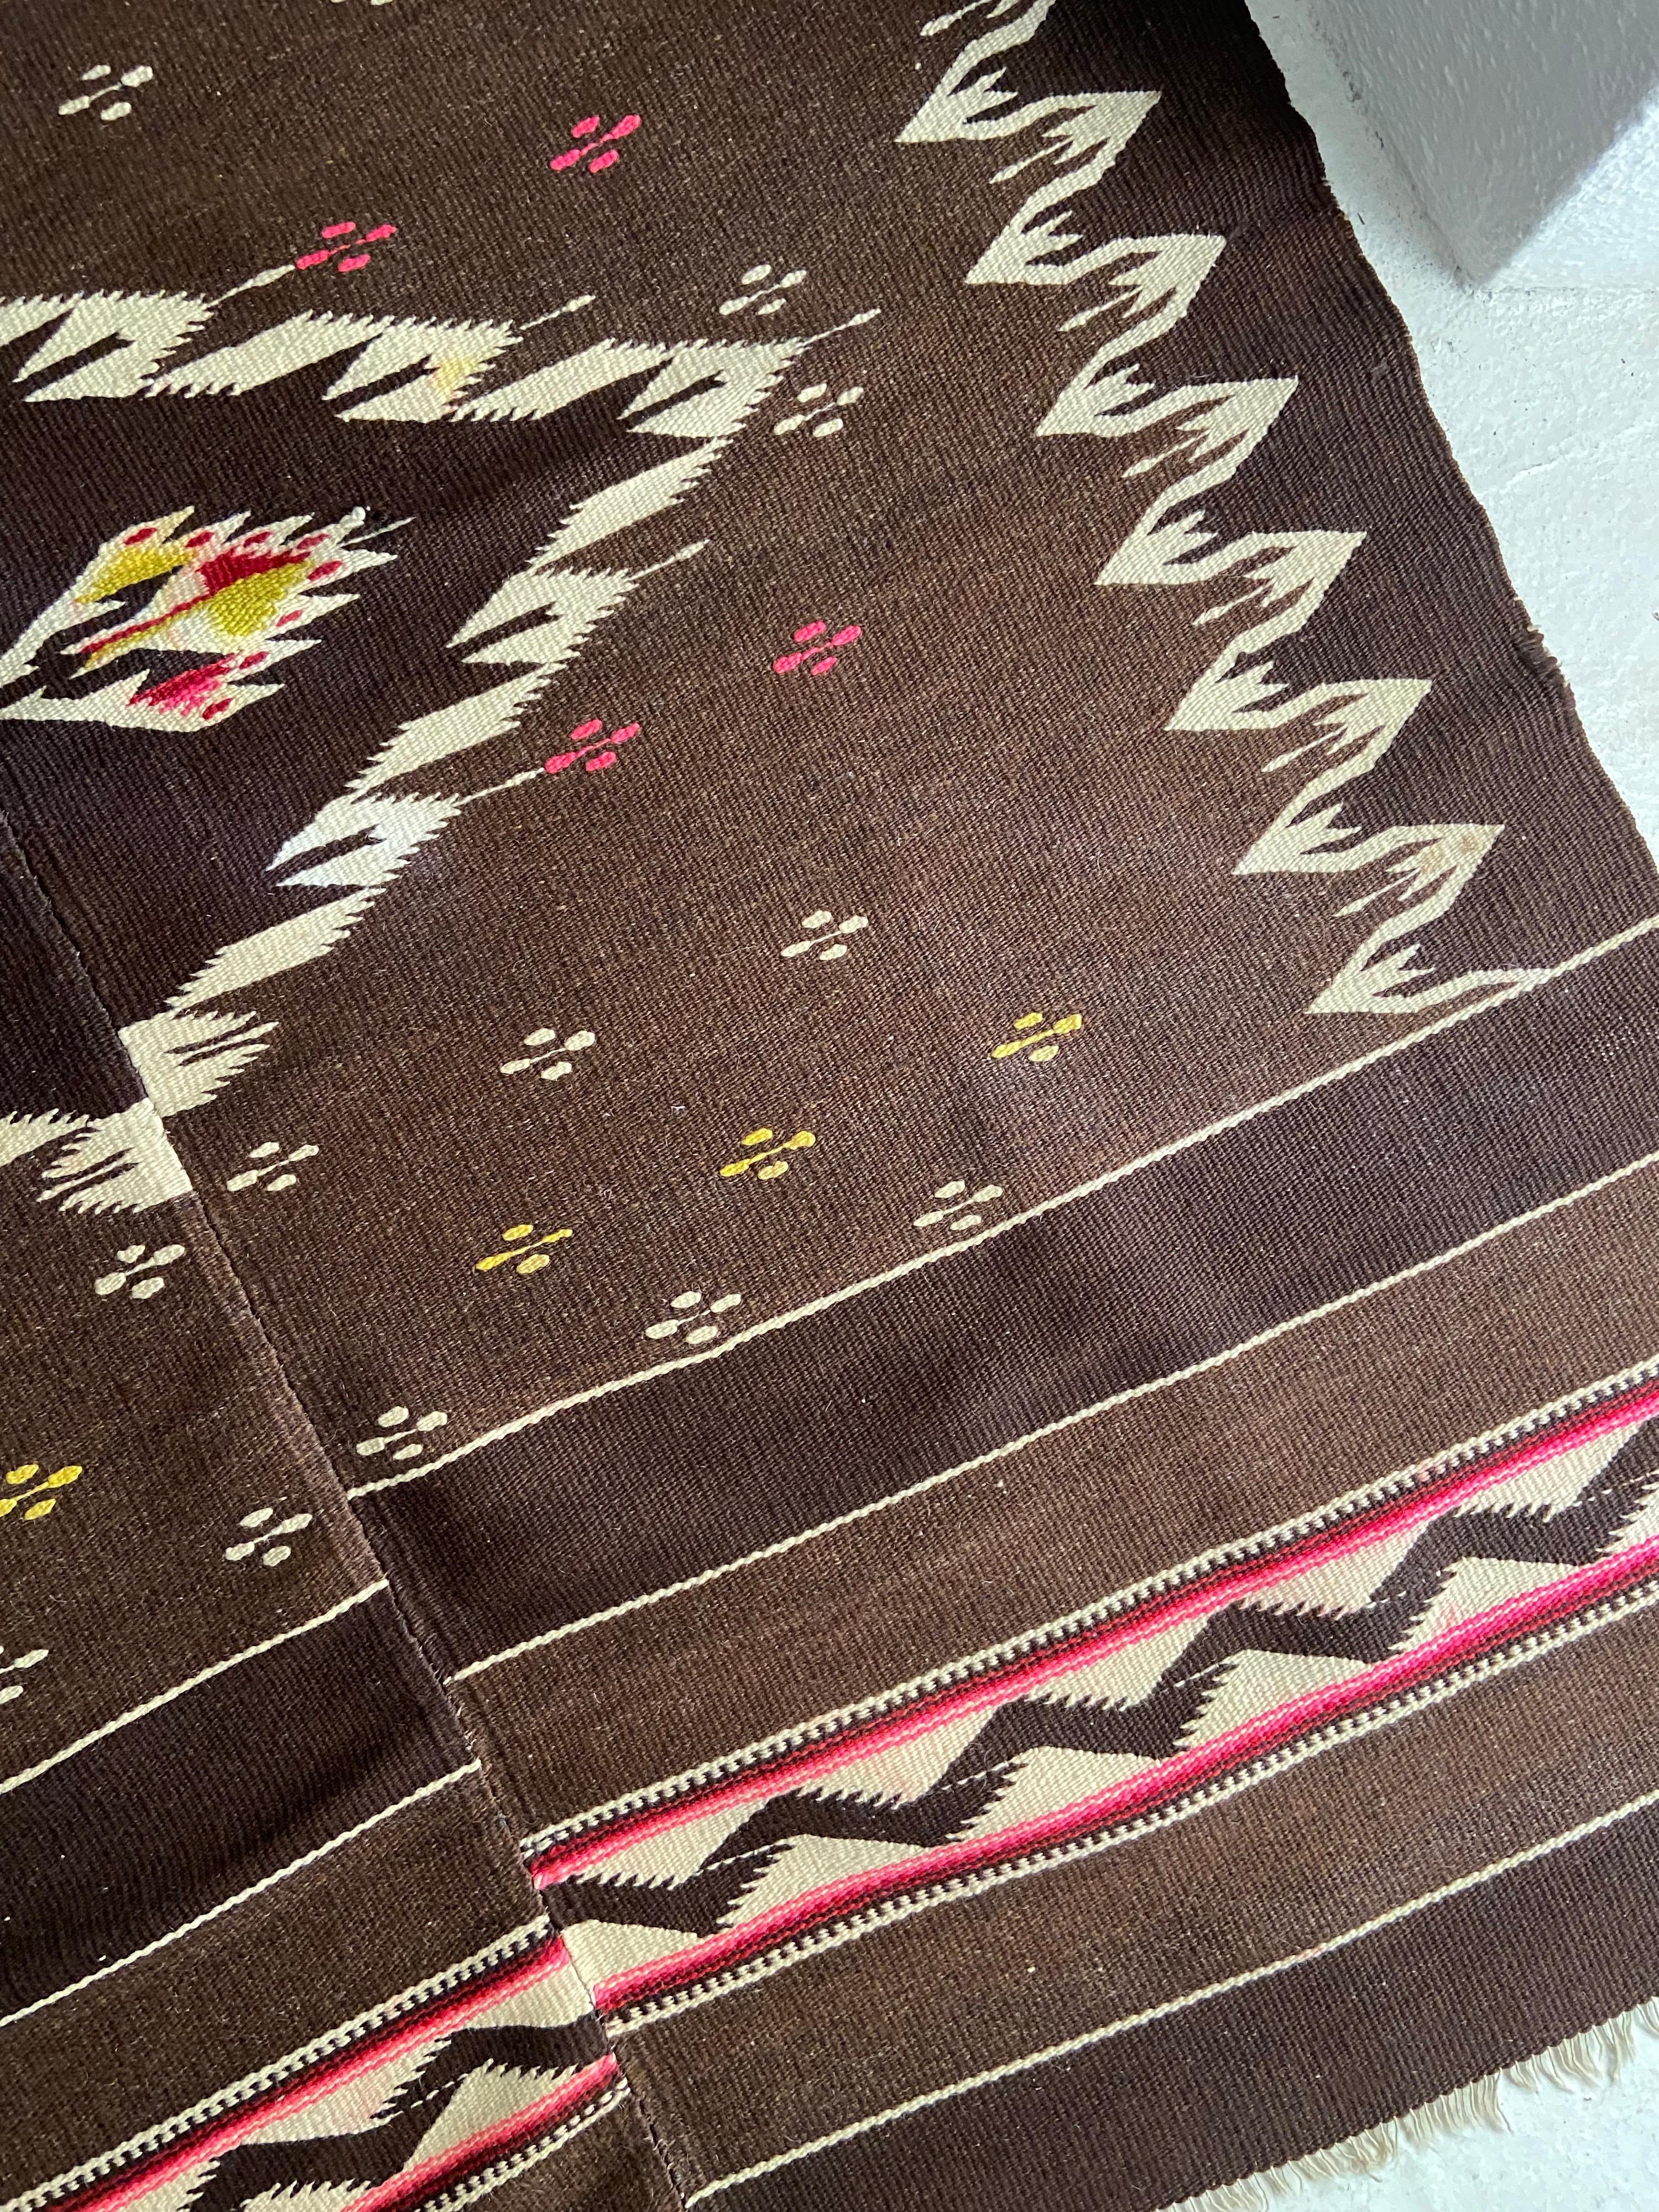 Mexican Mid-20th Century Wool Blanket from Oaxaca, Mexico